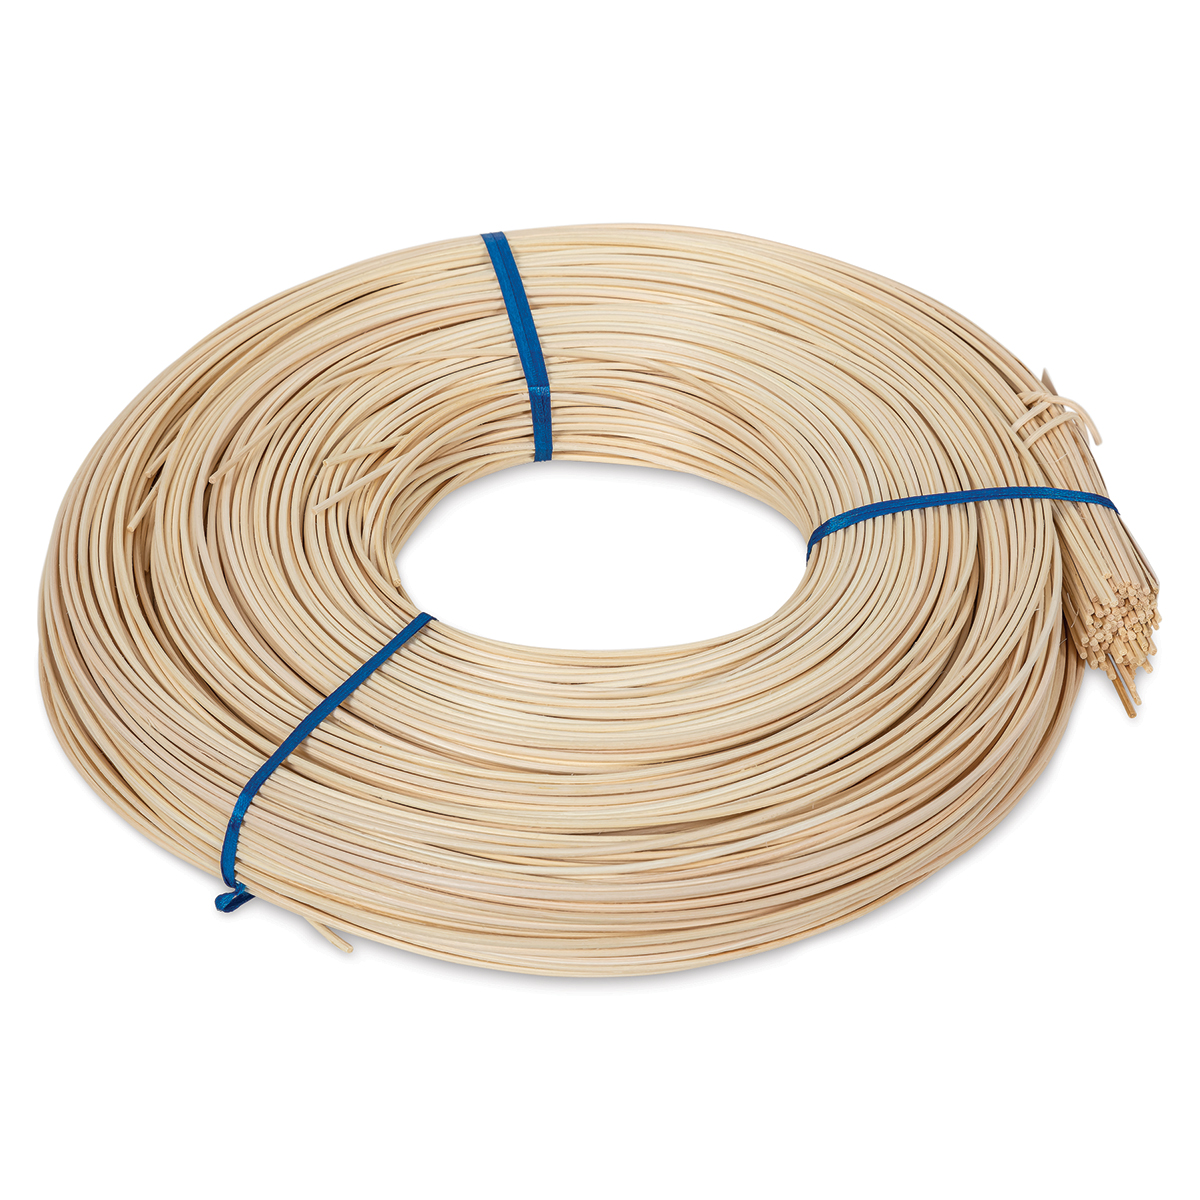 Rayher 6502800 Rattan Round Reed for Basket Making and Weaving Coil of Reeds 